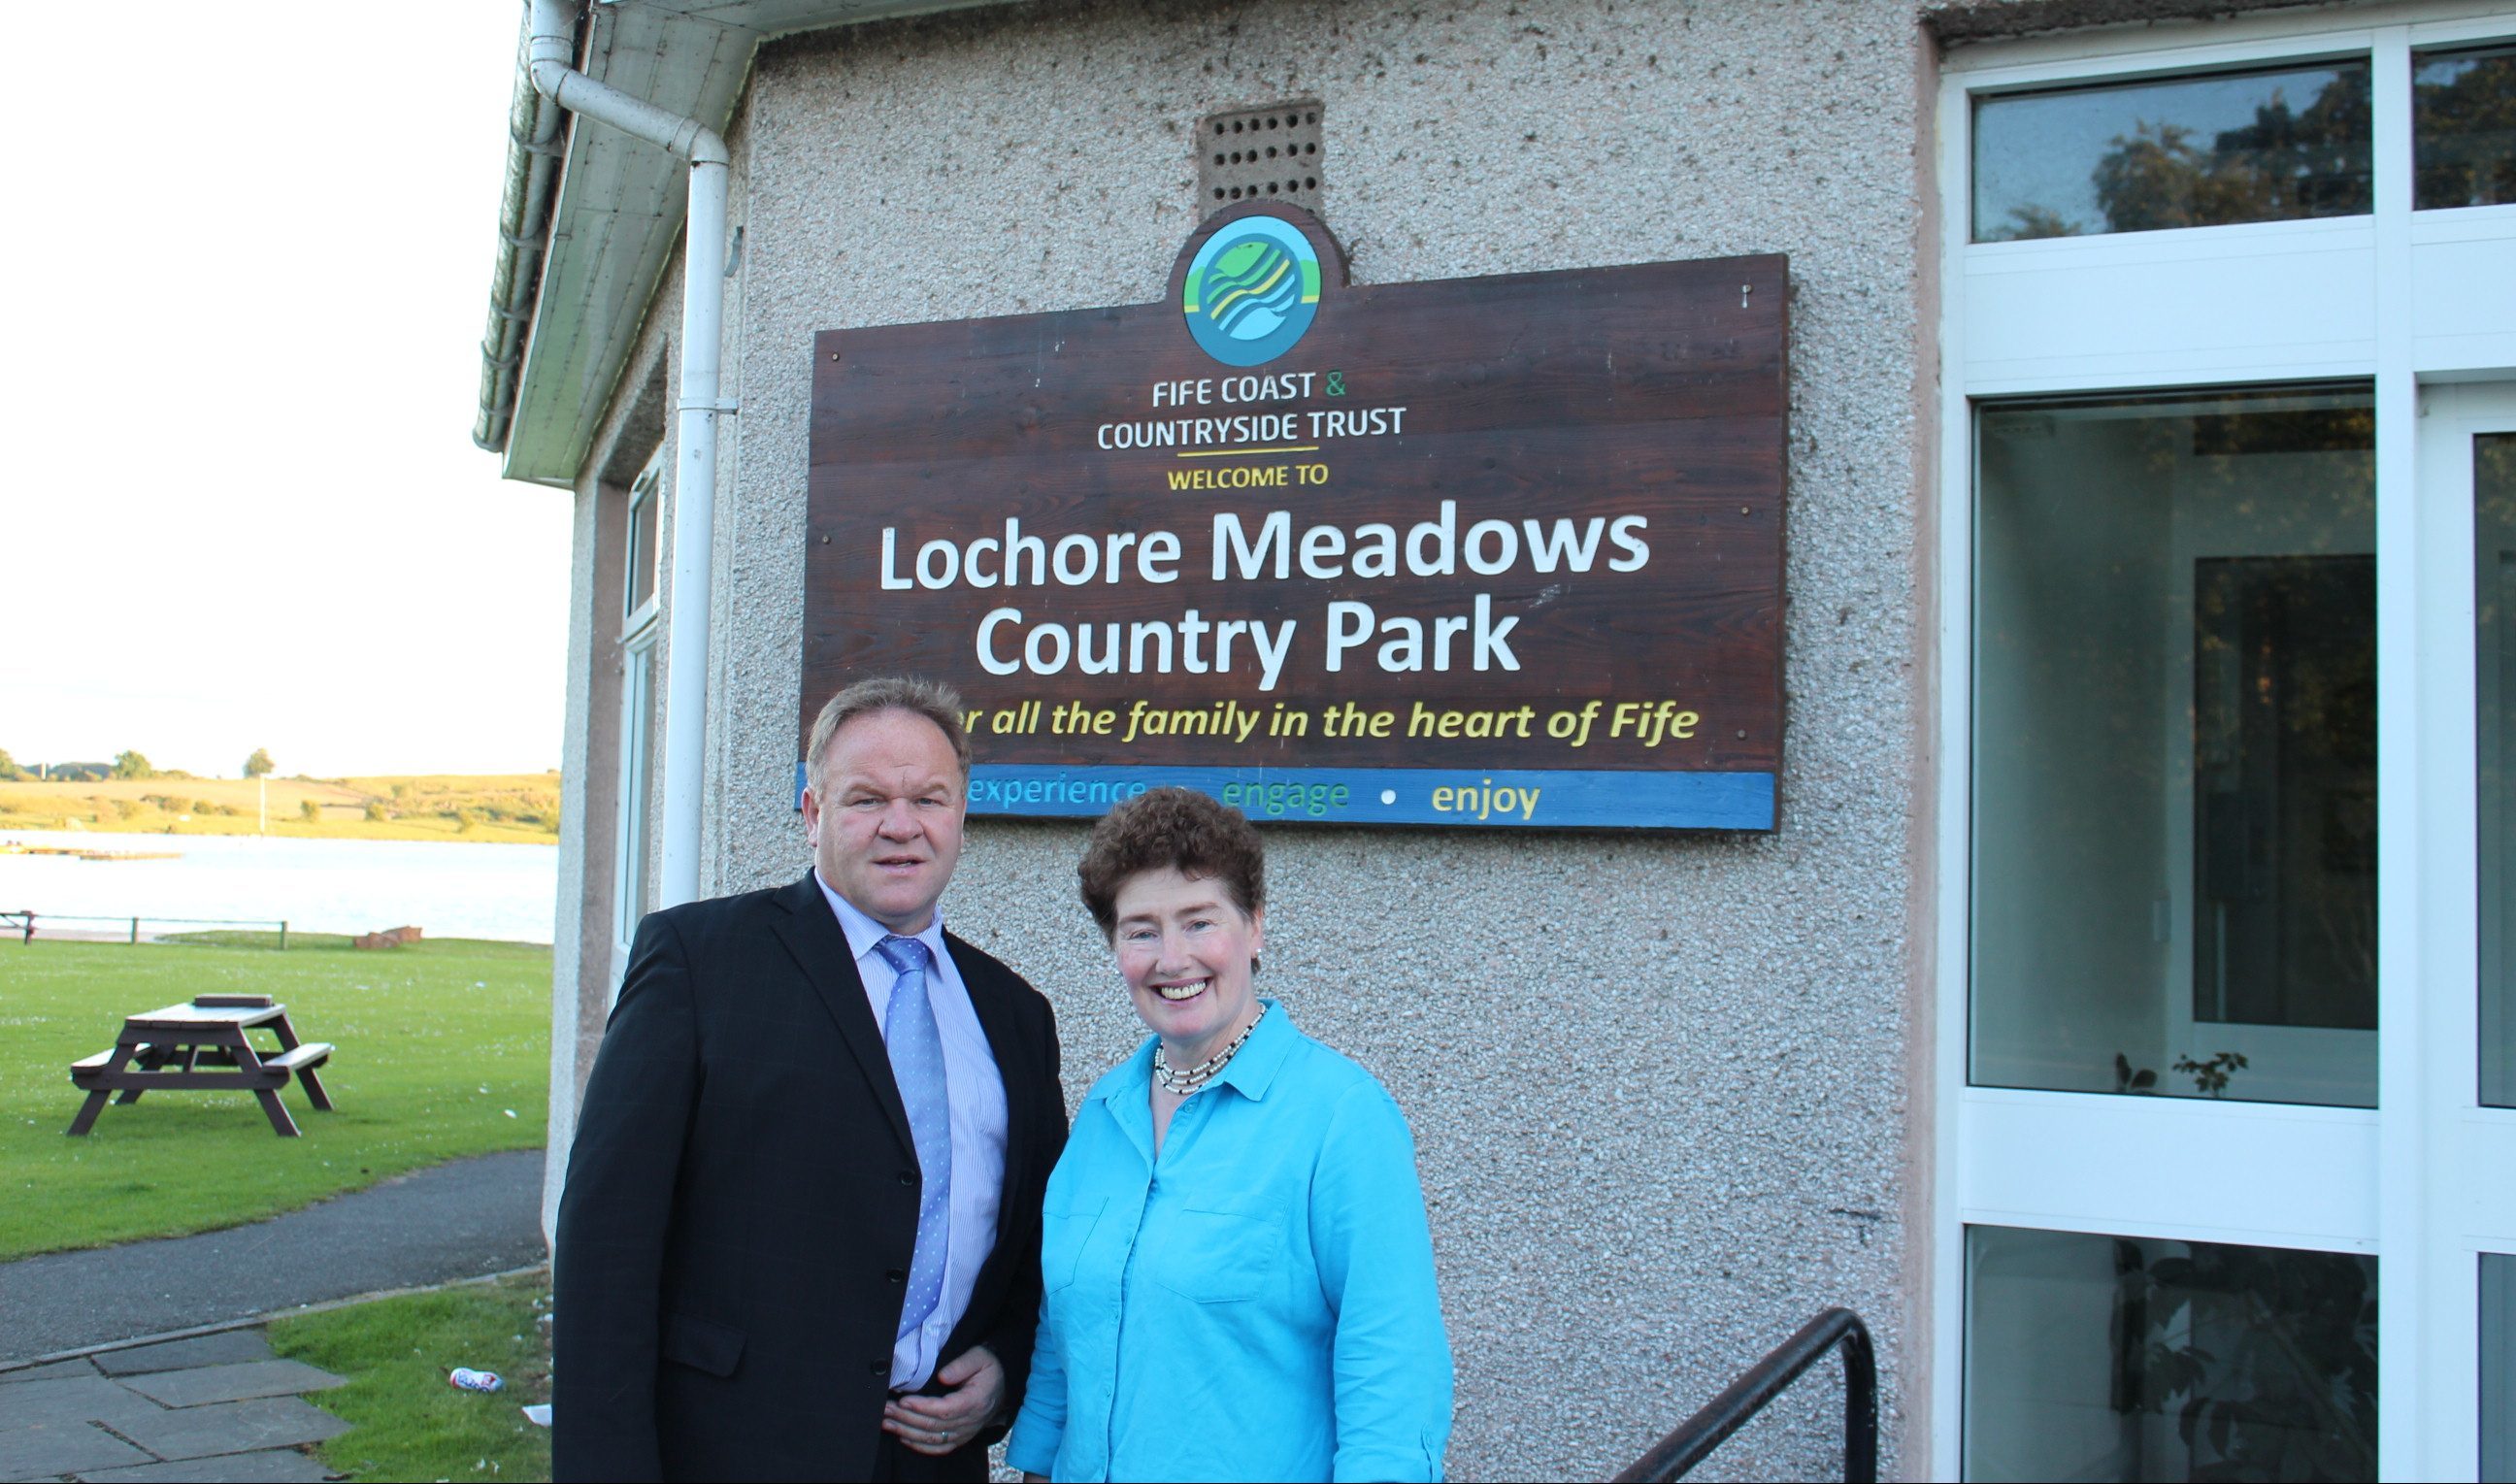 Cllrs Alex Campbell and Mary Lockhart at the centre in Lochore Meadows Country Park which is to be replaced